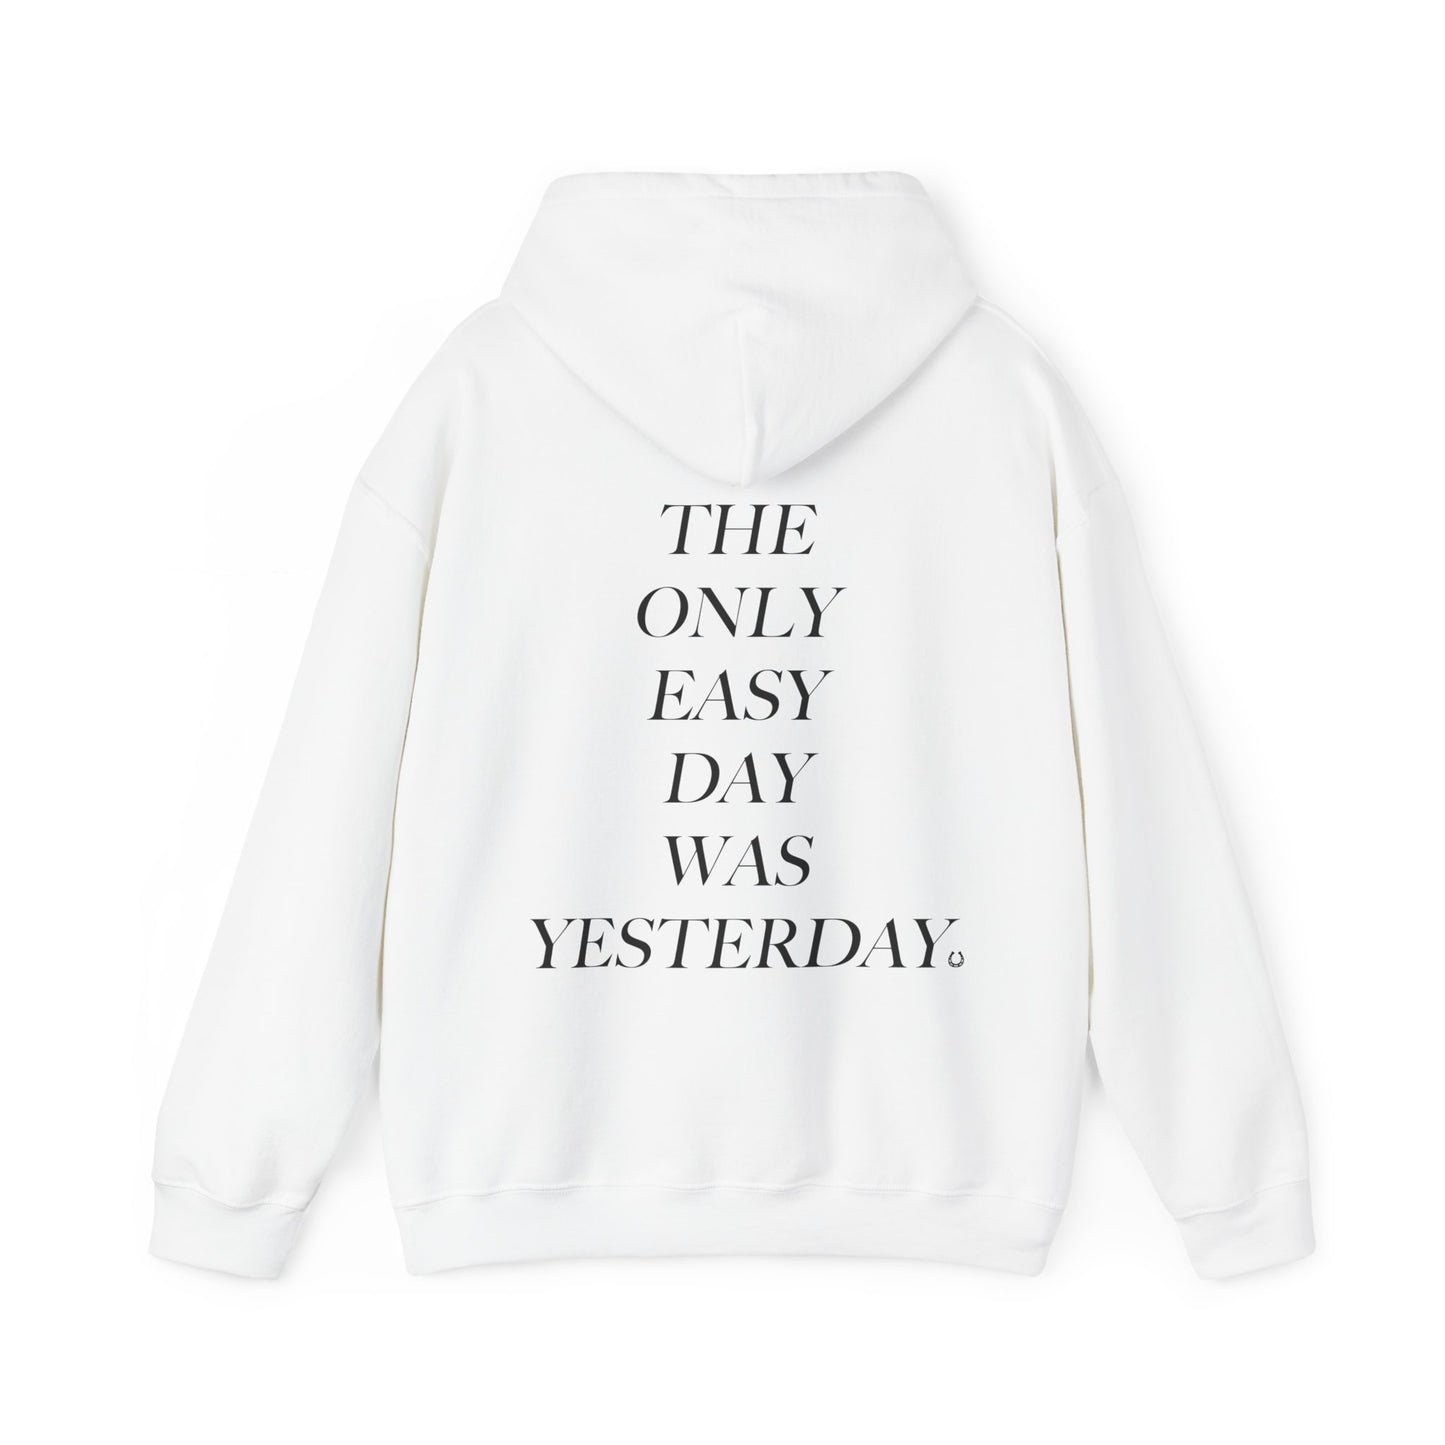 Sydney Sisil: The Only Easy Day Was Yesterday Hoodie